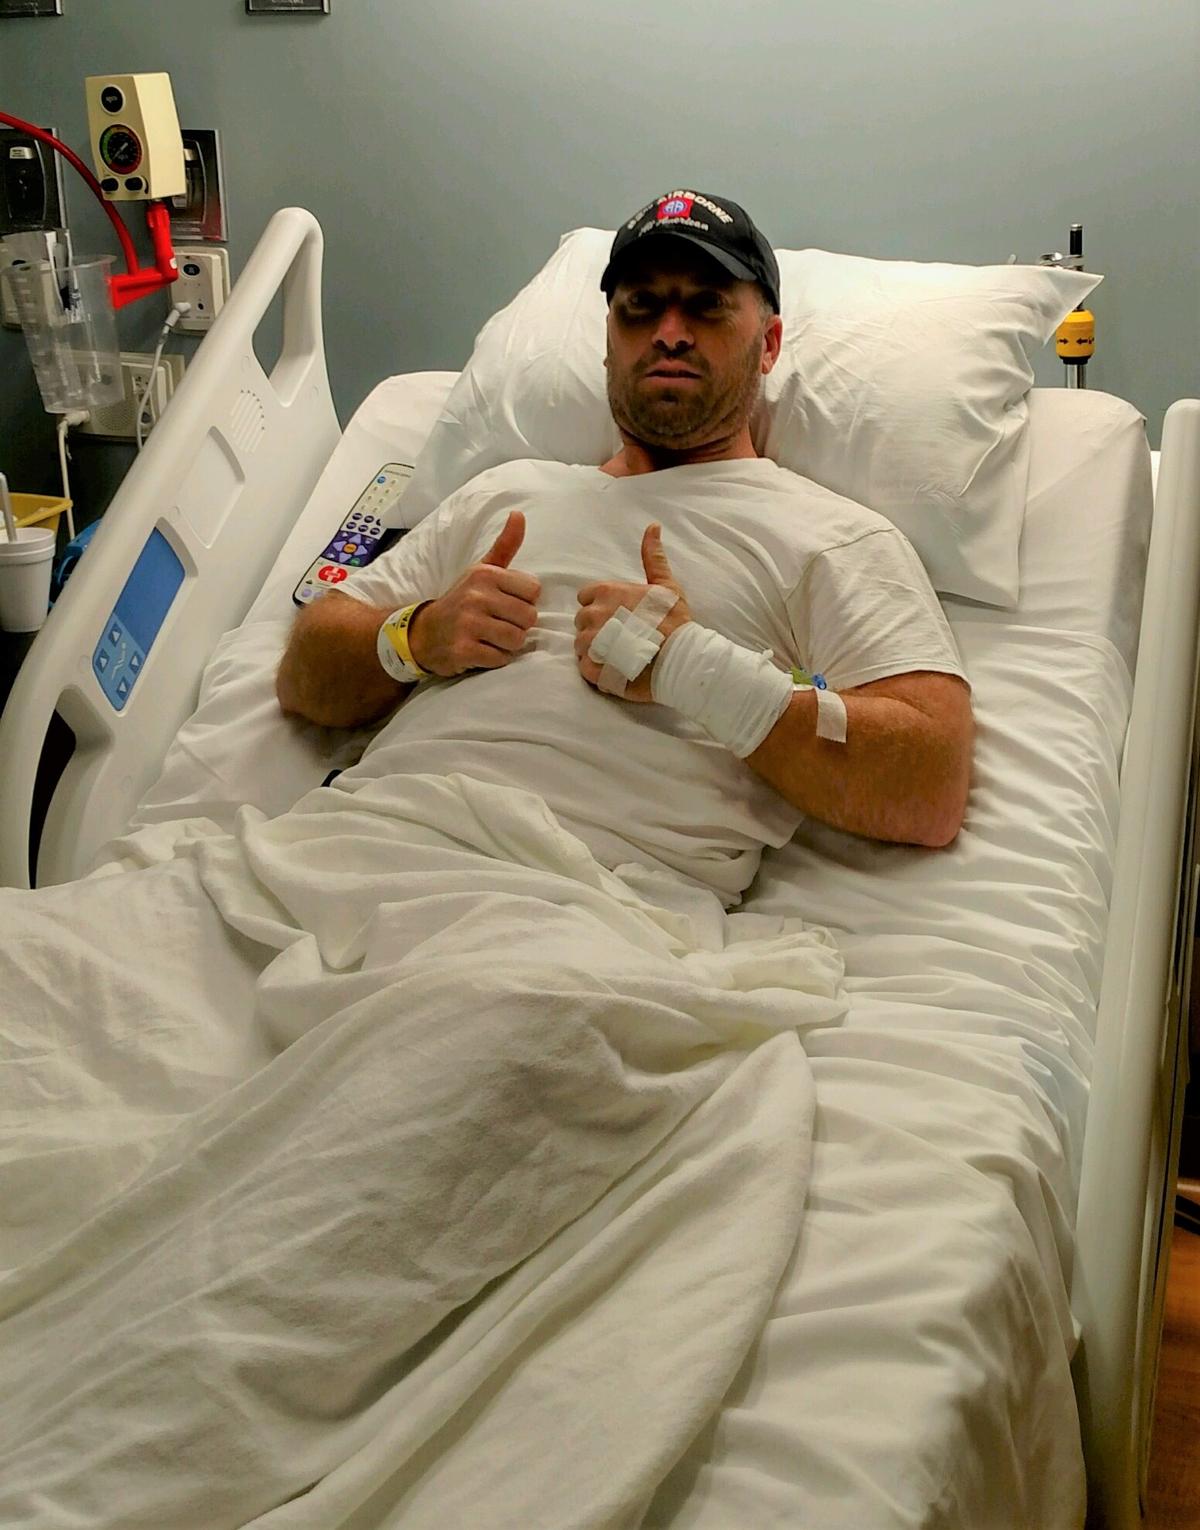 Steven Connors during his recovery. (Courtesy ofLakeland Fire Department)